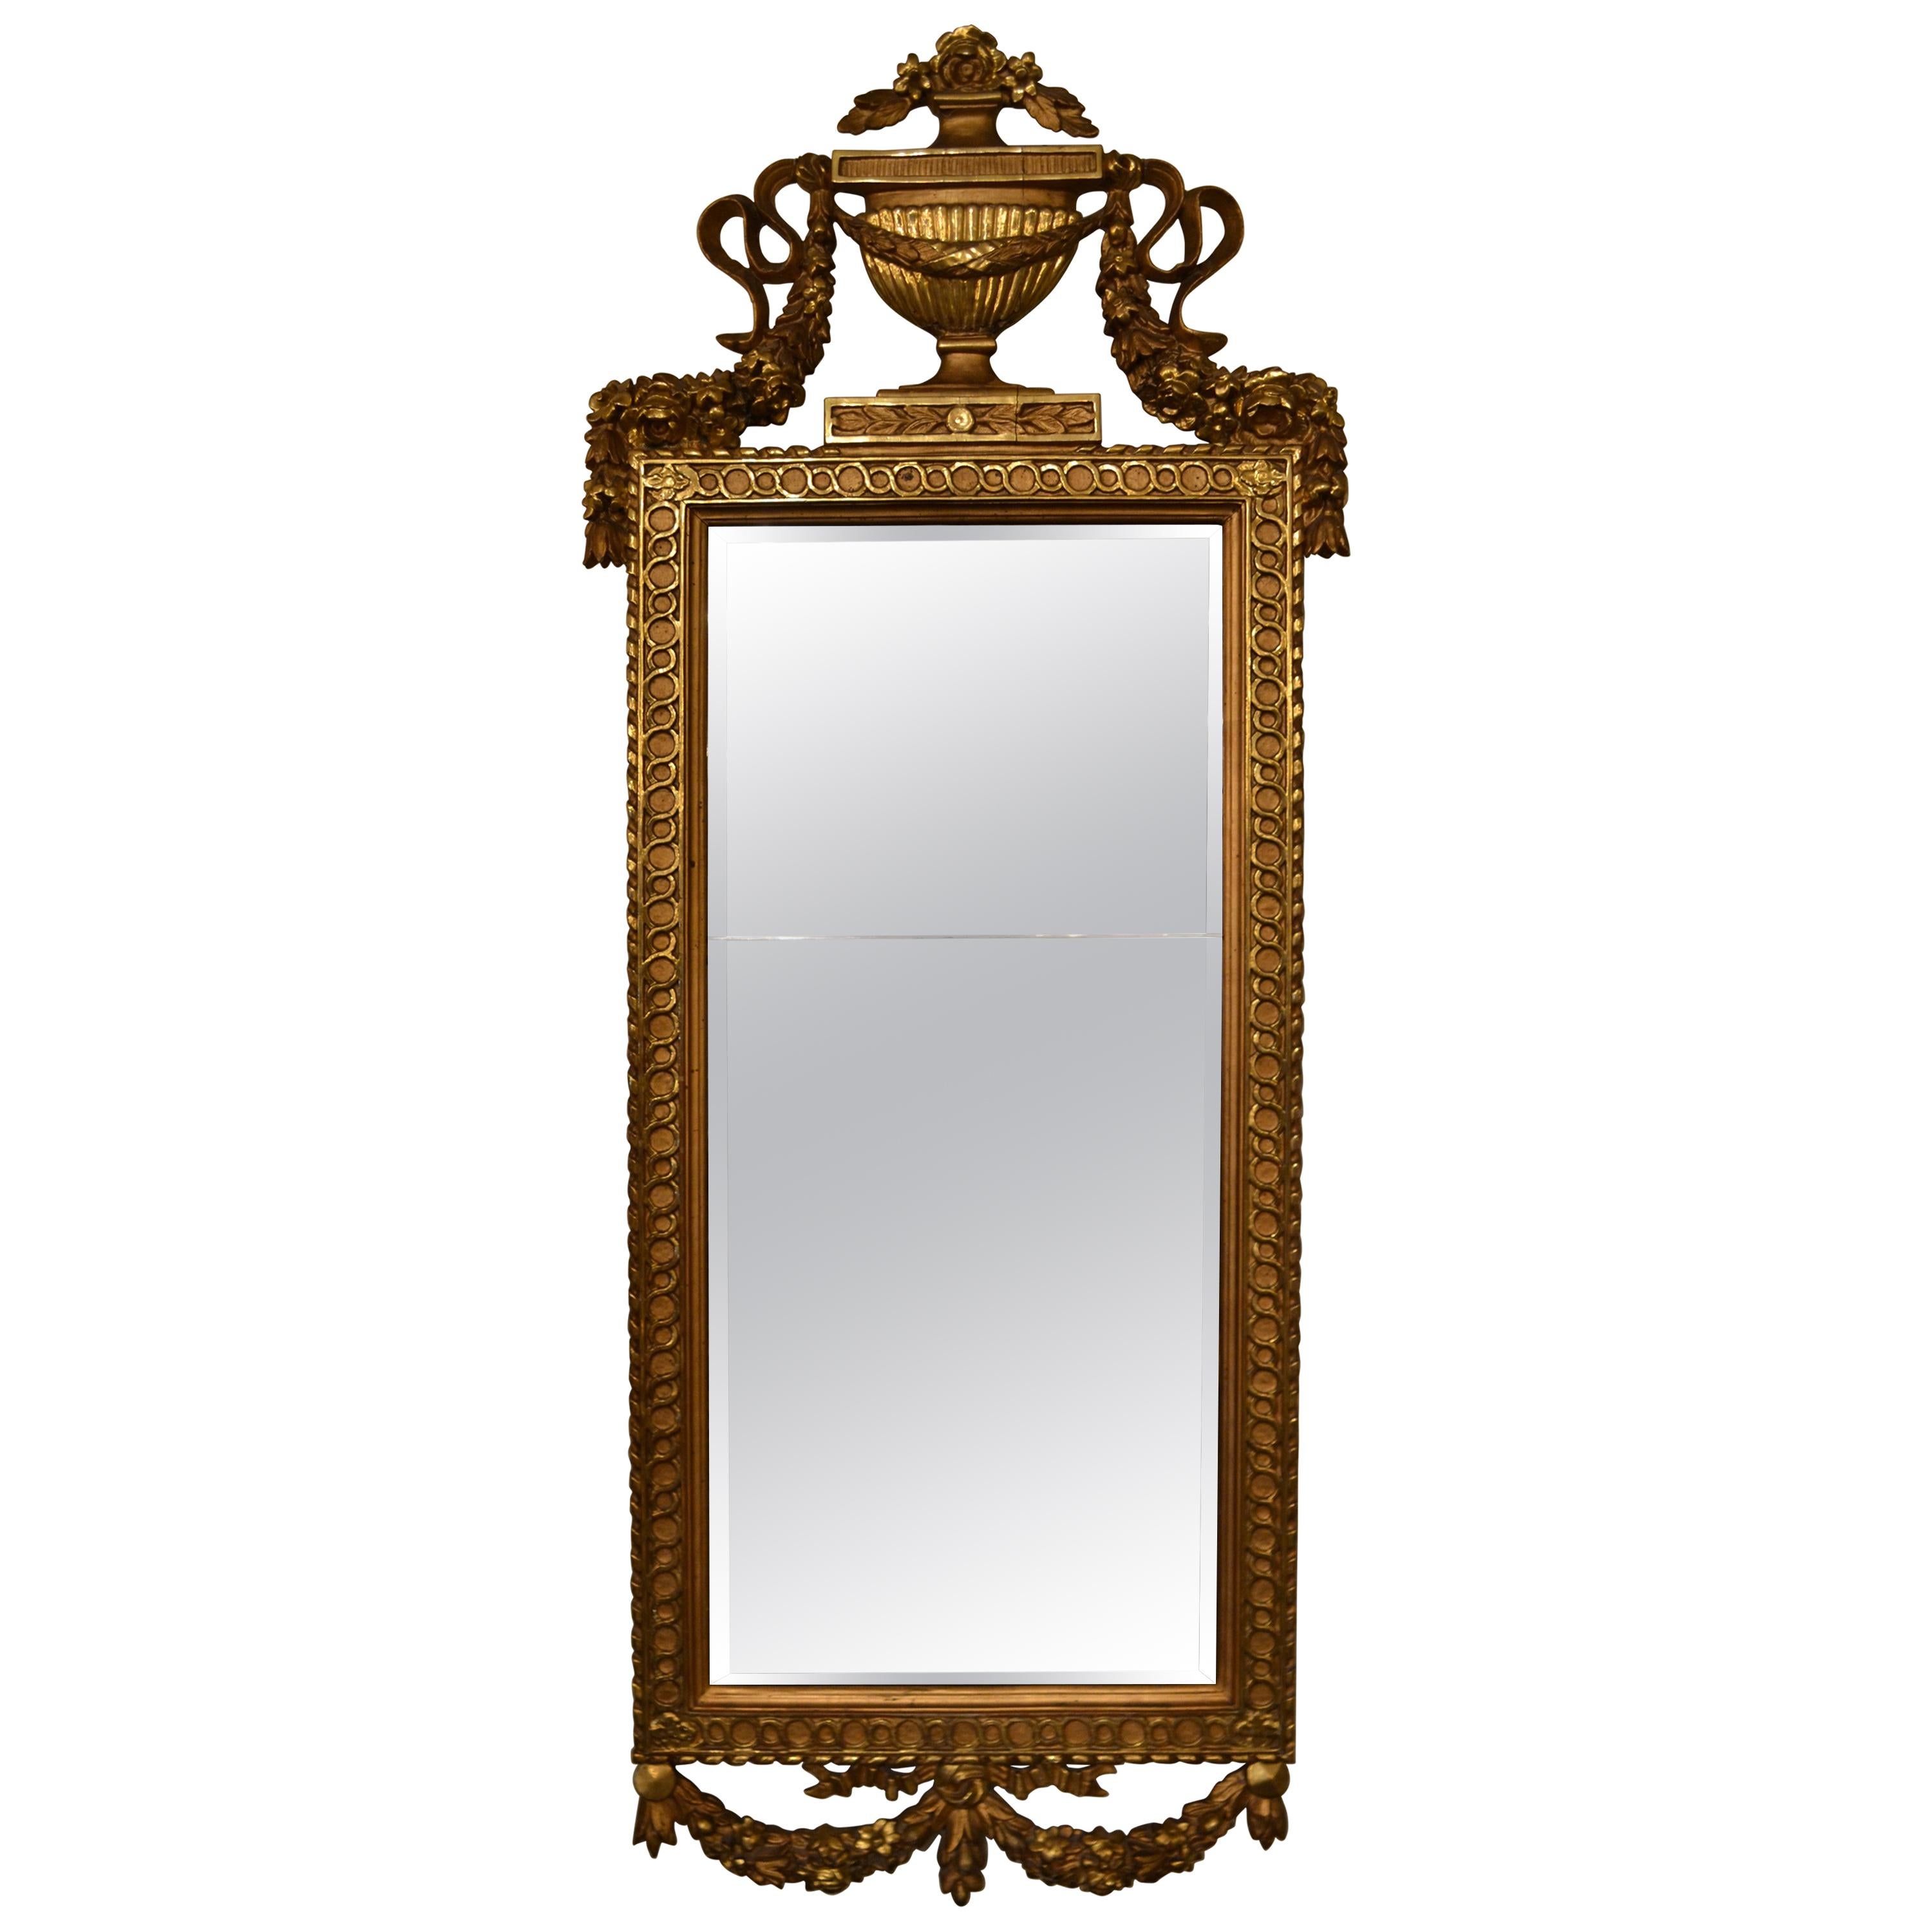 What are pier mirrors?